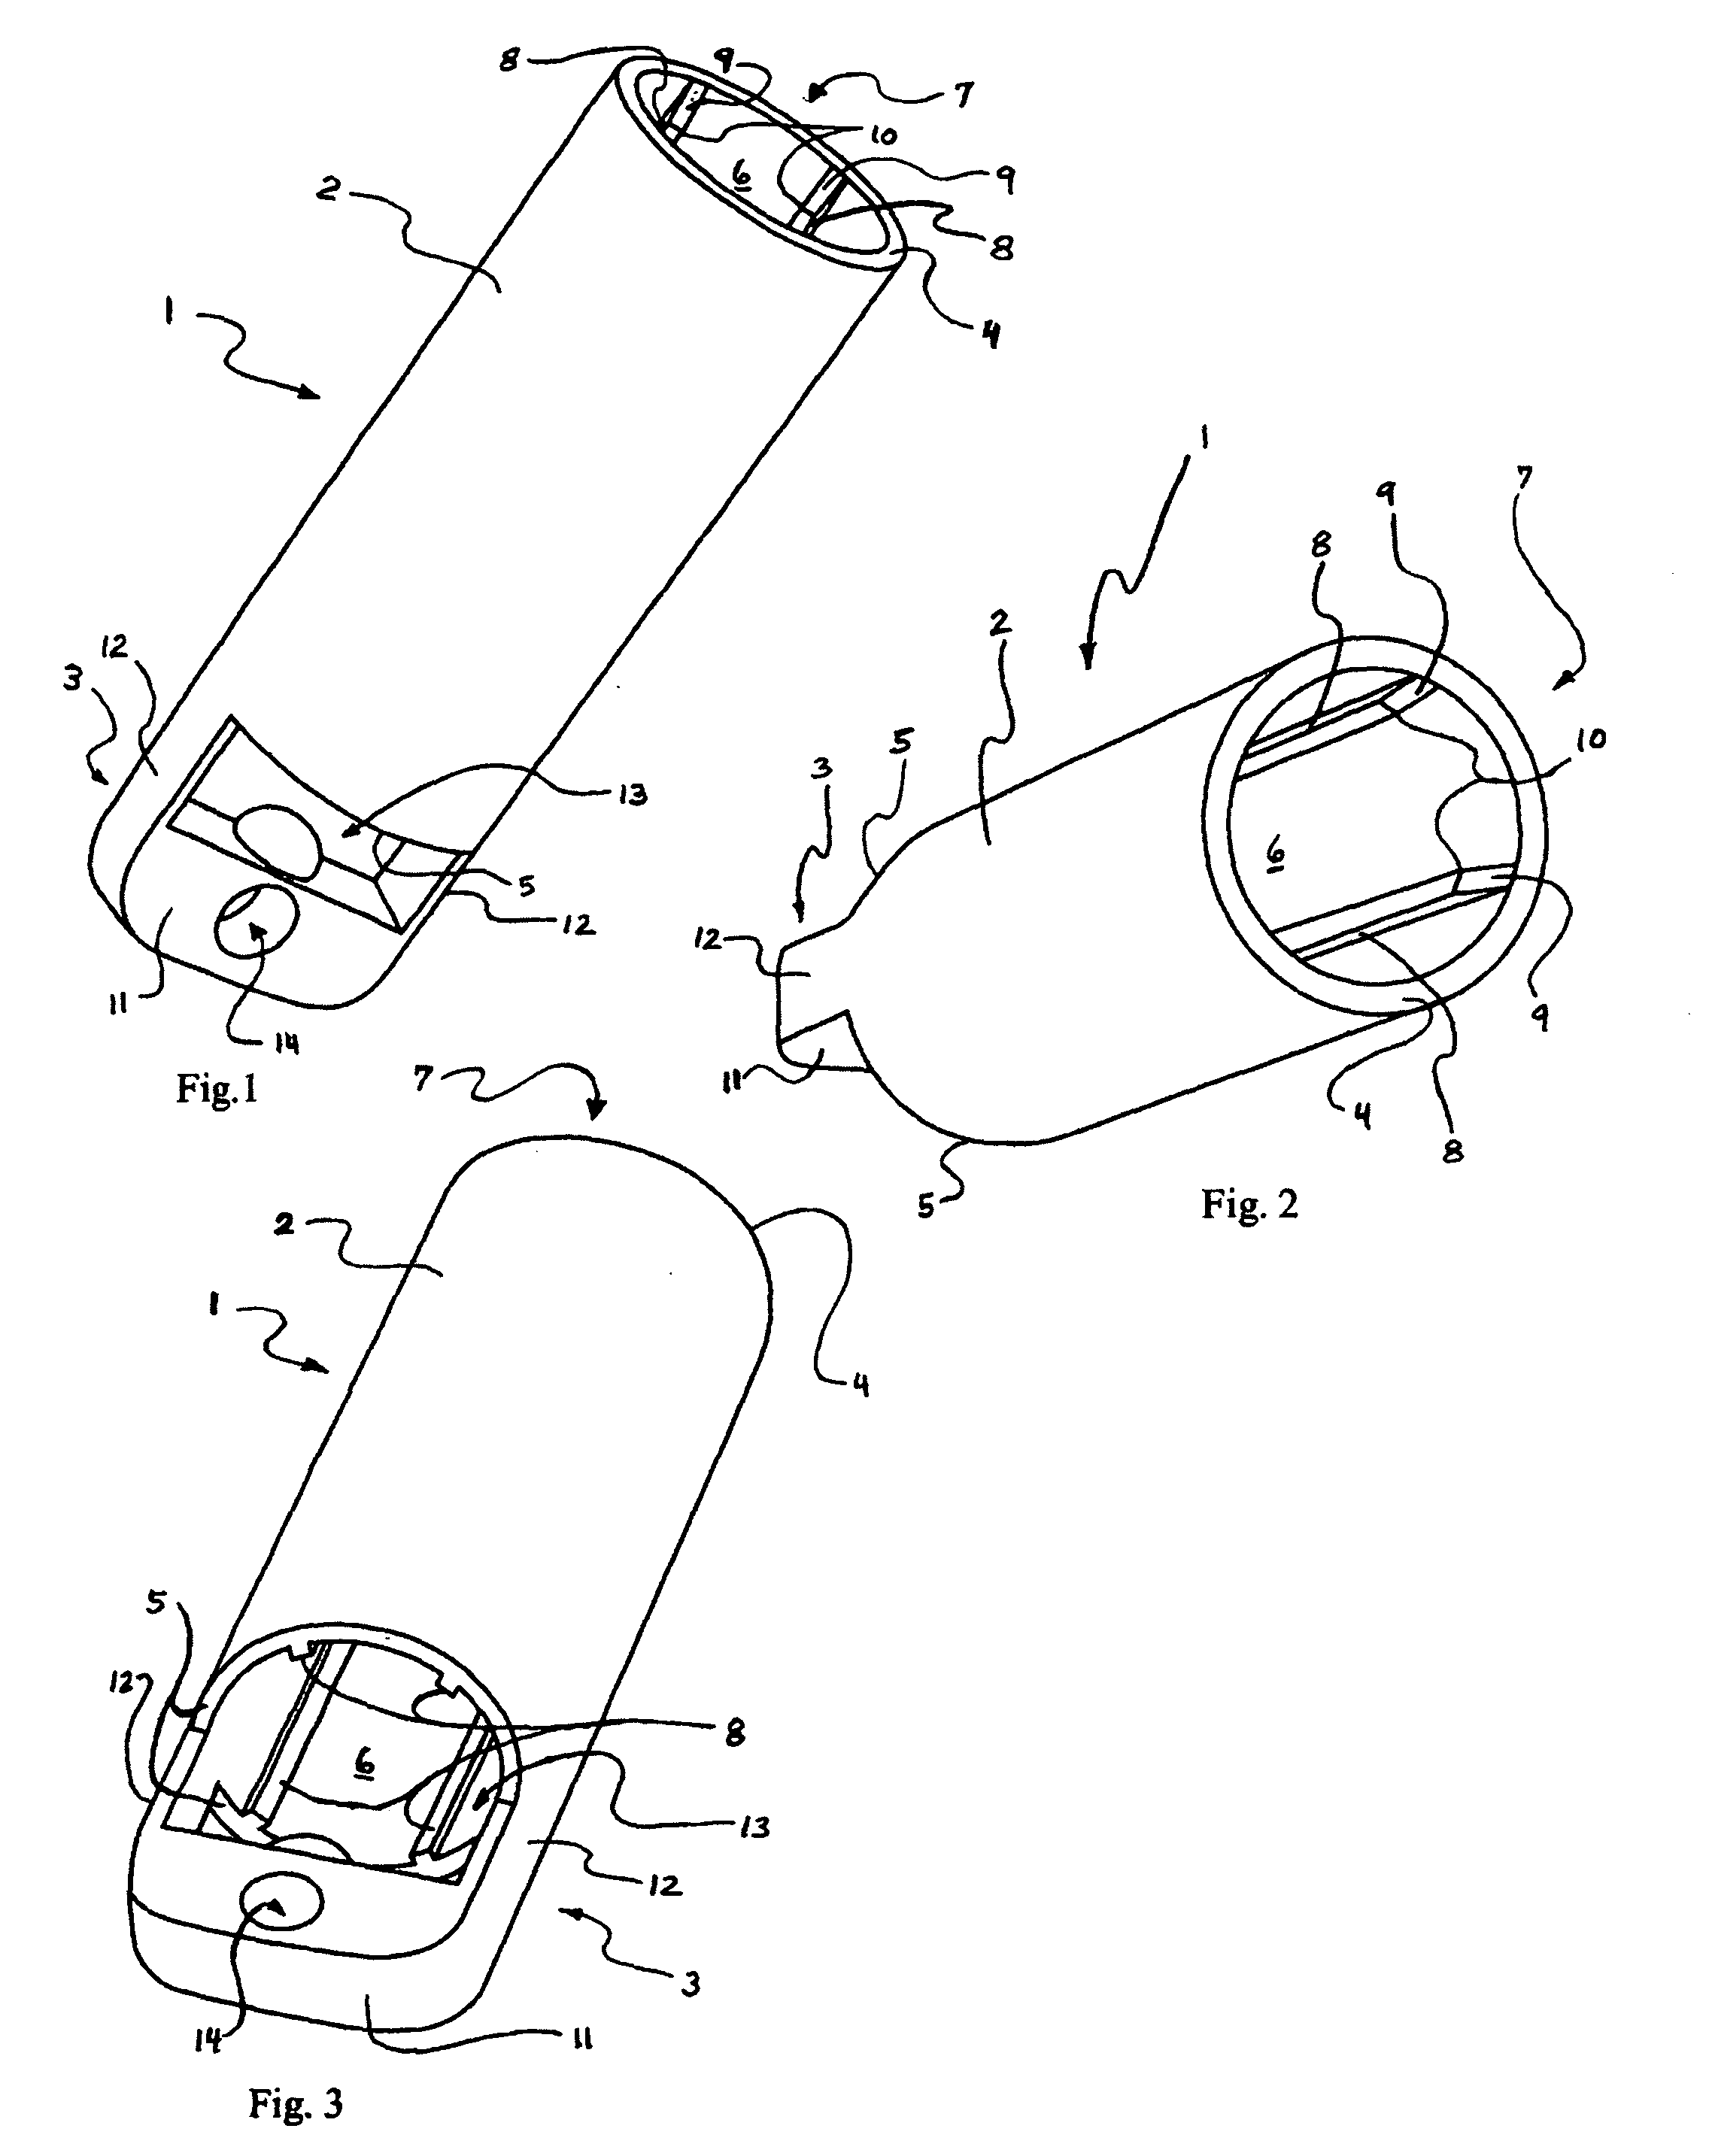 Attachable housing for holding, carrying, and using elongated personal items